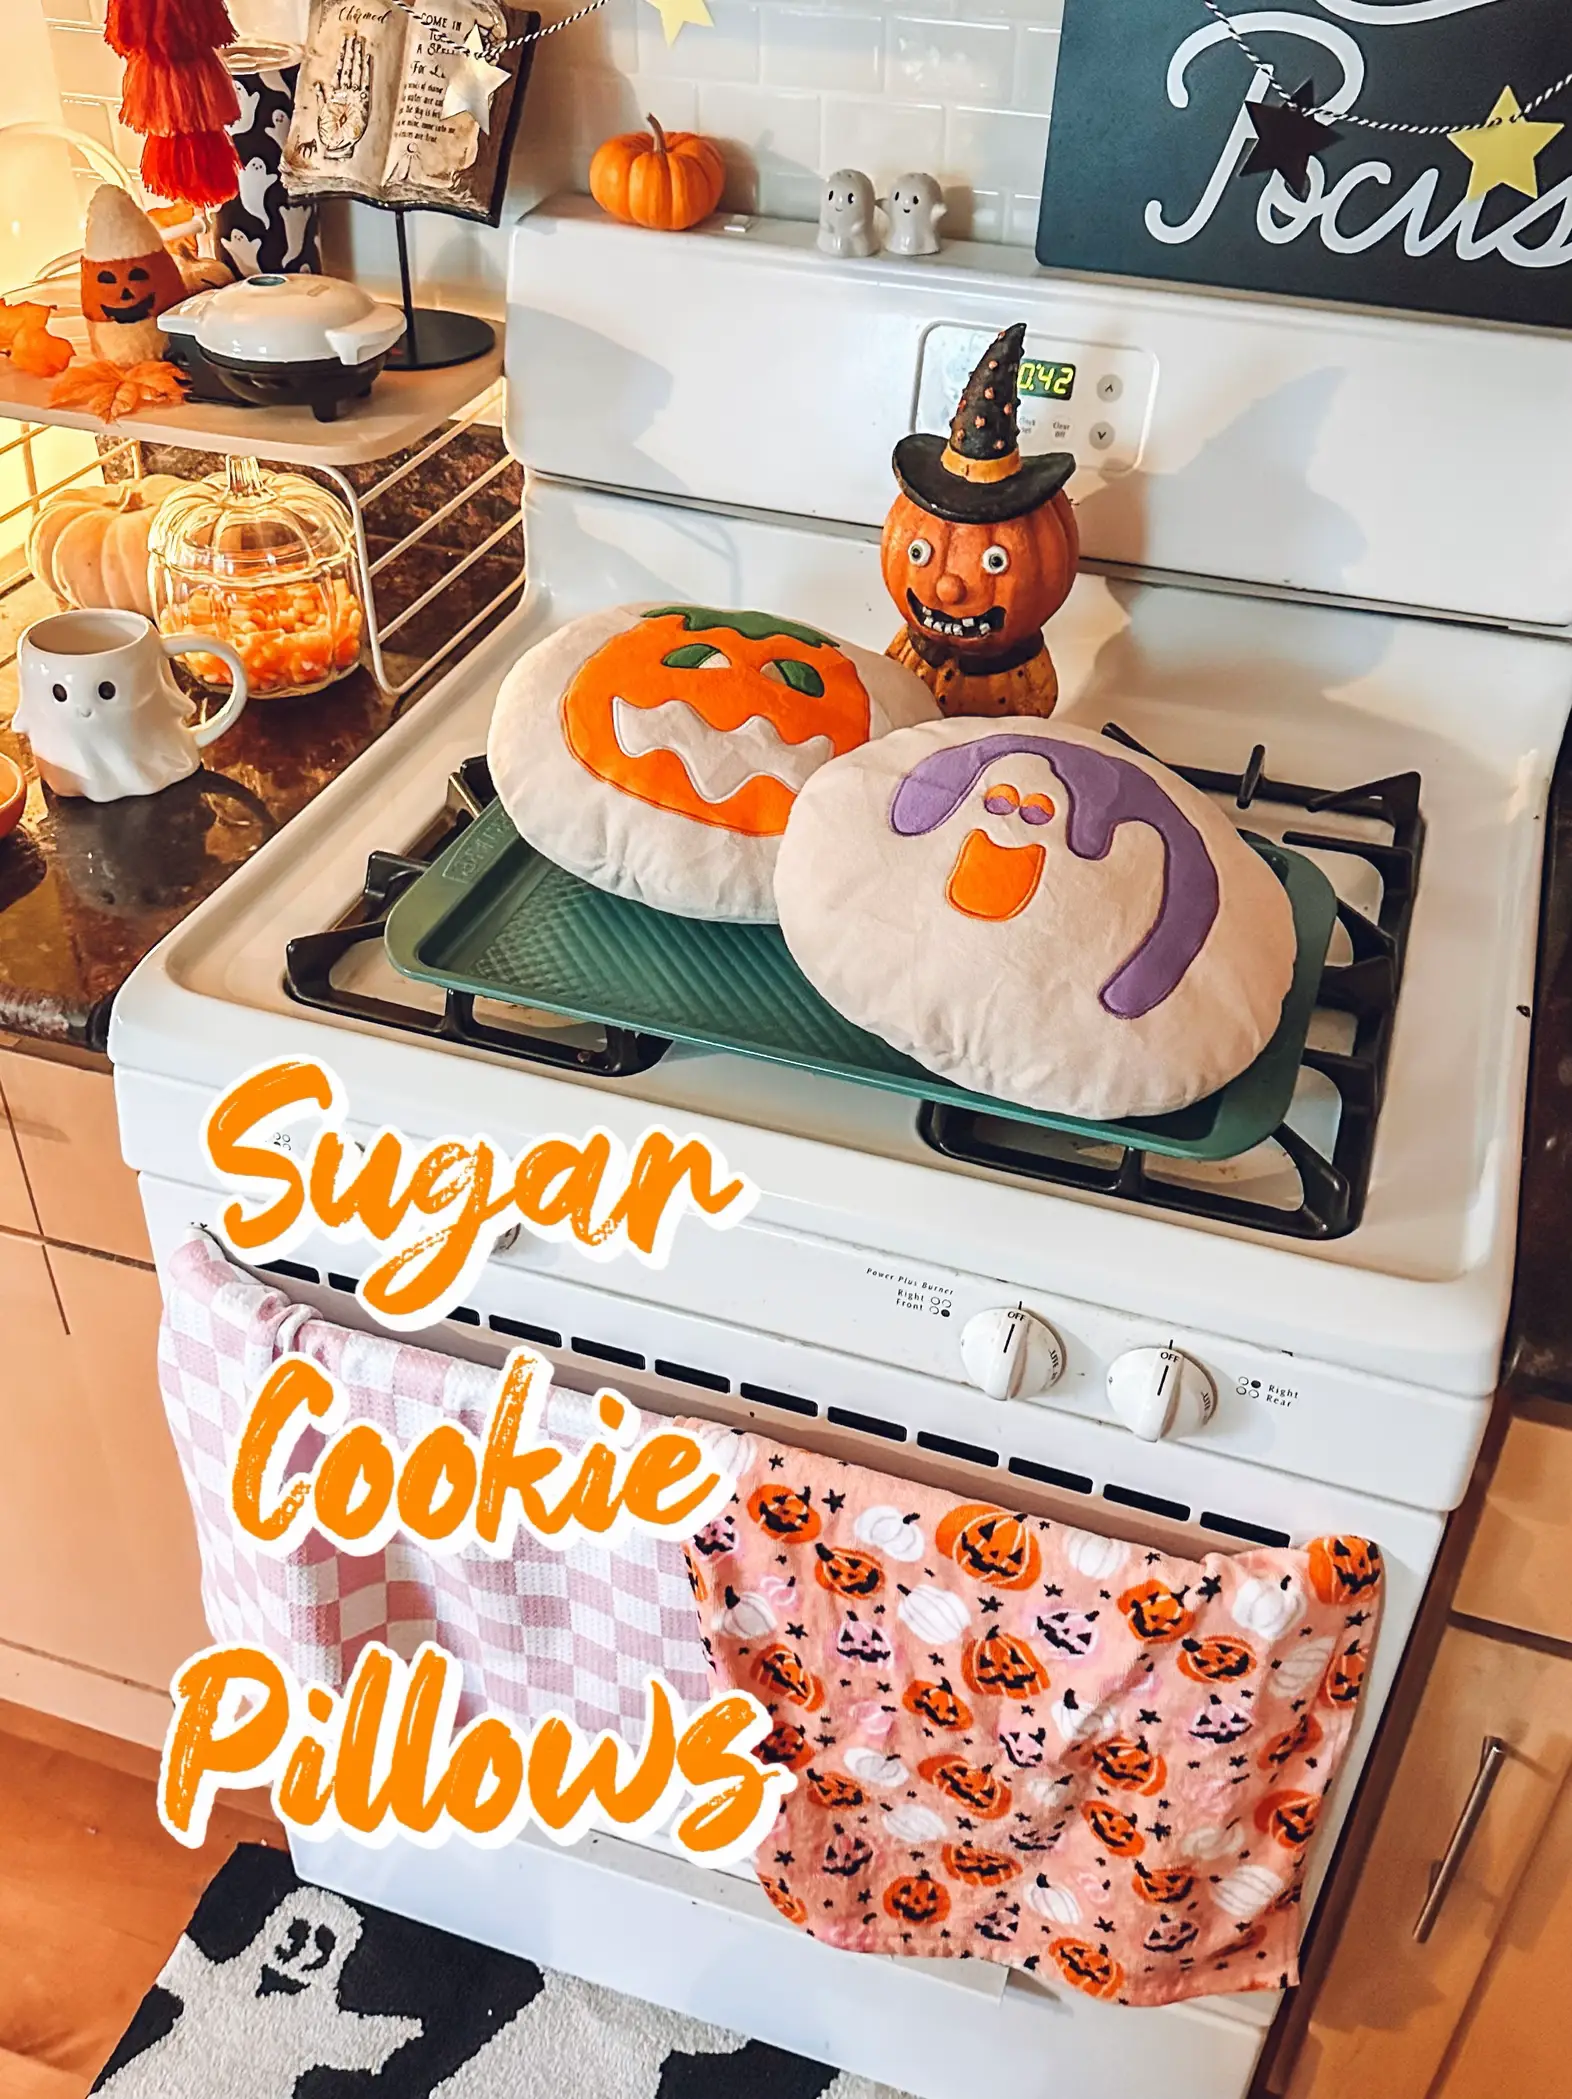  A pile of sugar cookie pillows on a stove.